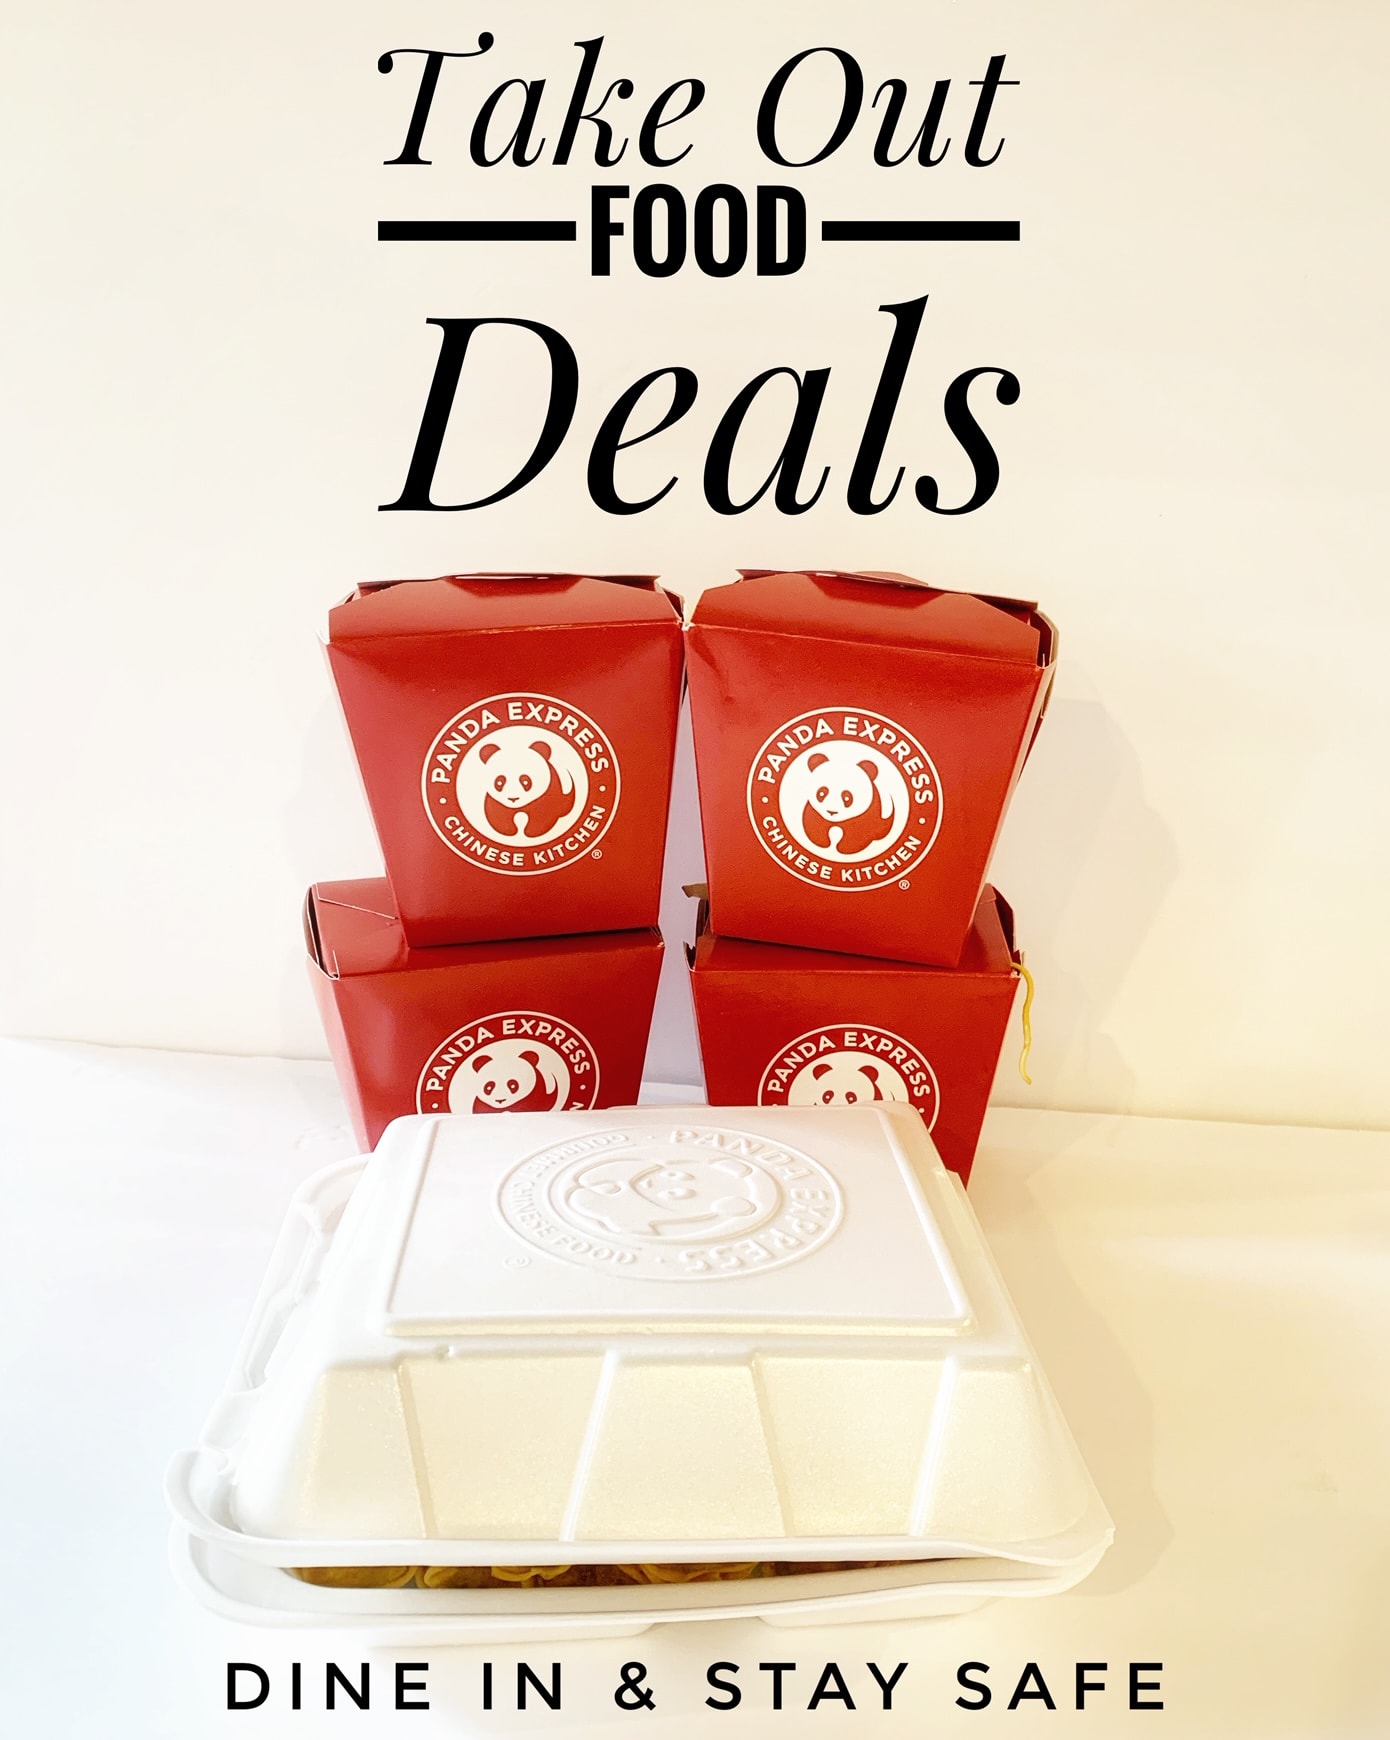 Family Meal Deals - Family-Sized Meals for Takeout & Delivery